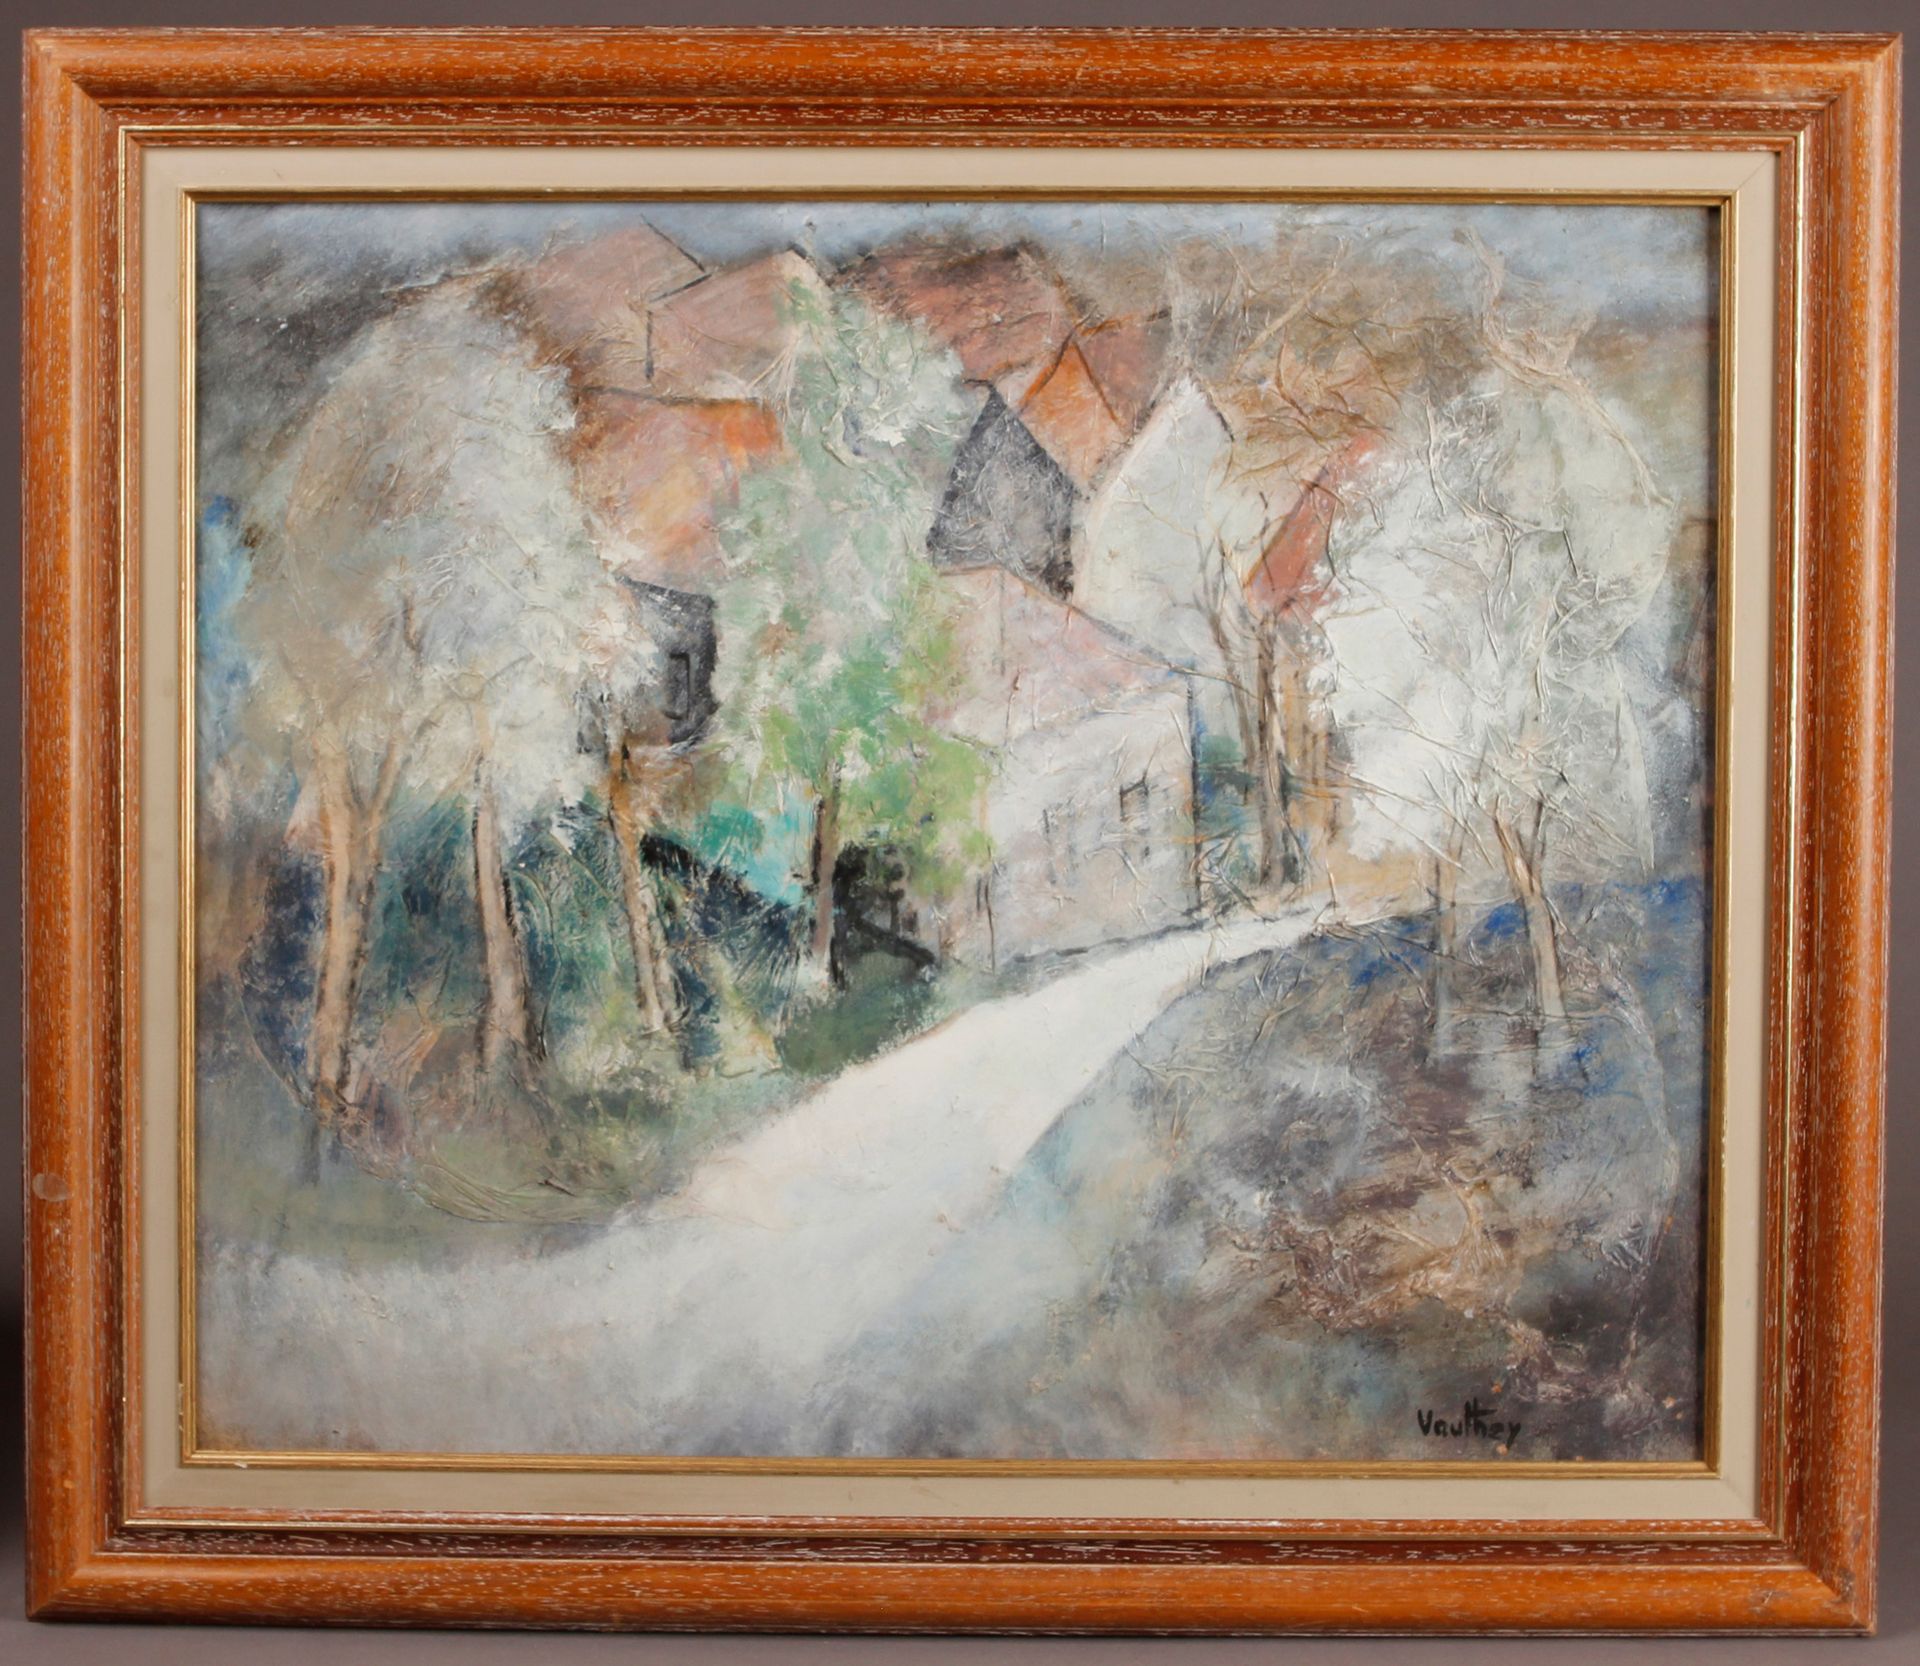 Null Pierre VAUTHEY (1937-2019)

Path in a village

Oil on isorel, signed lower &hellip;